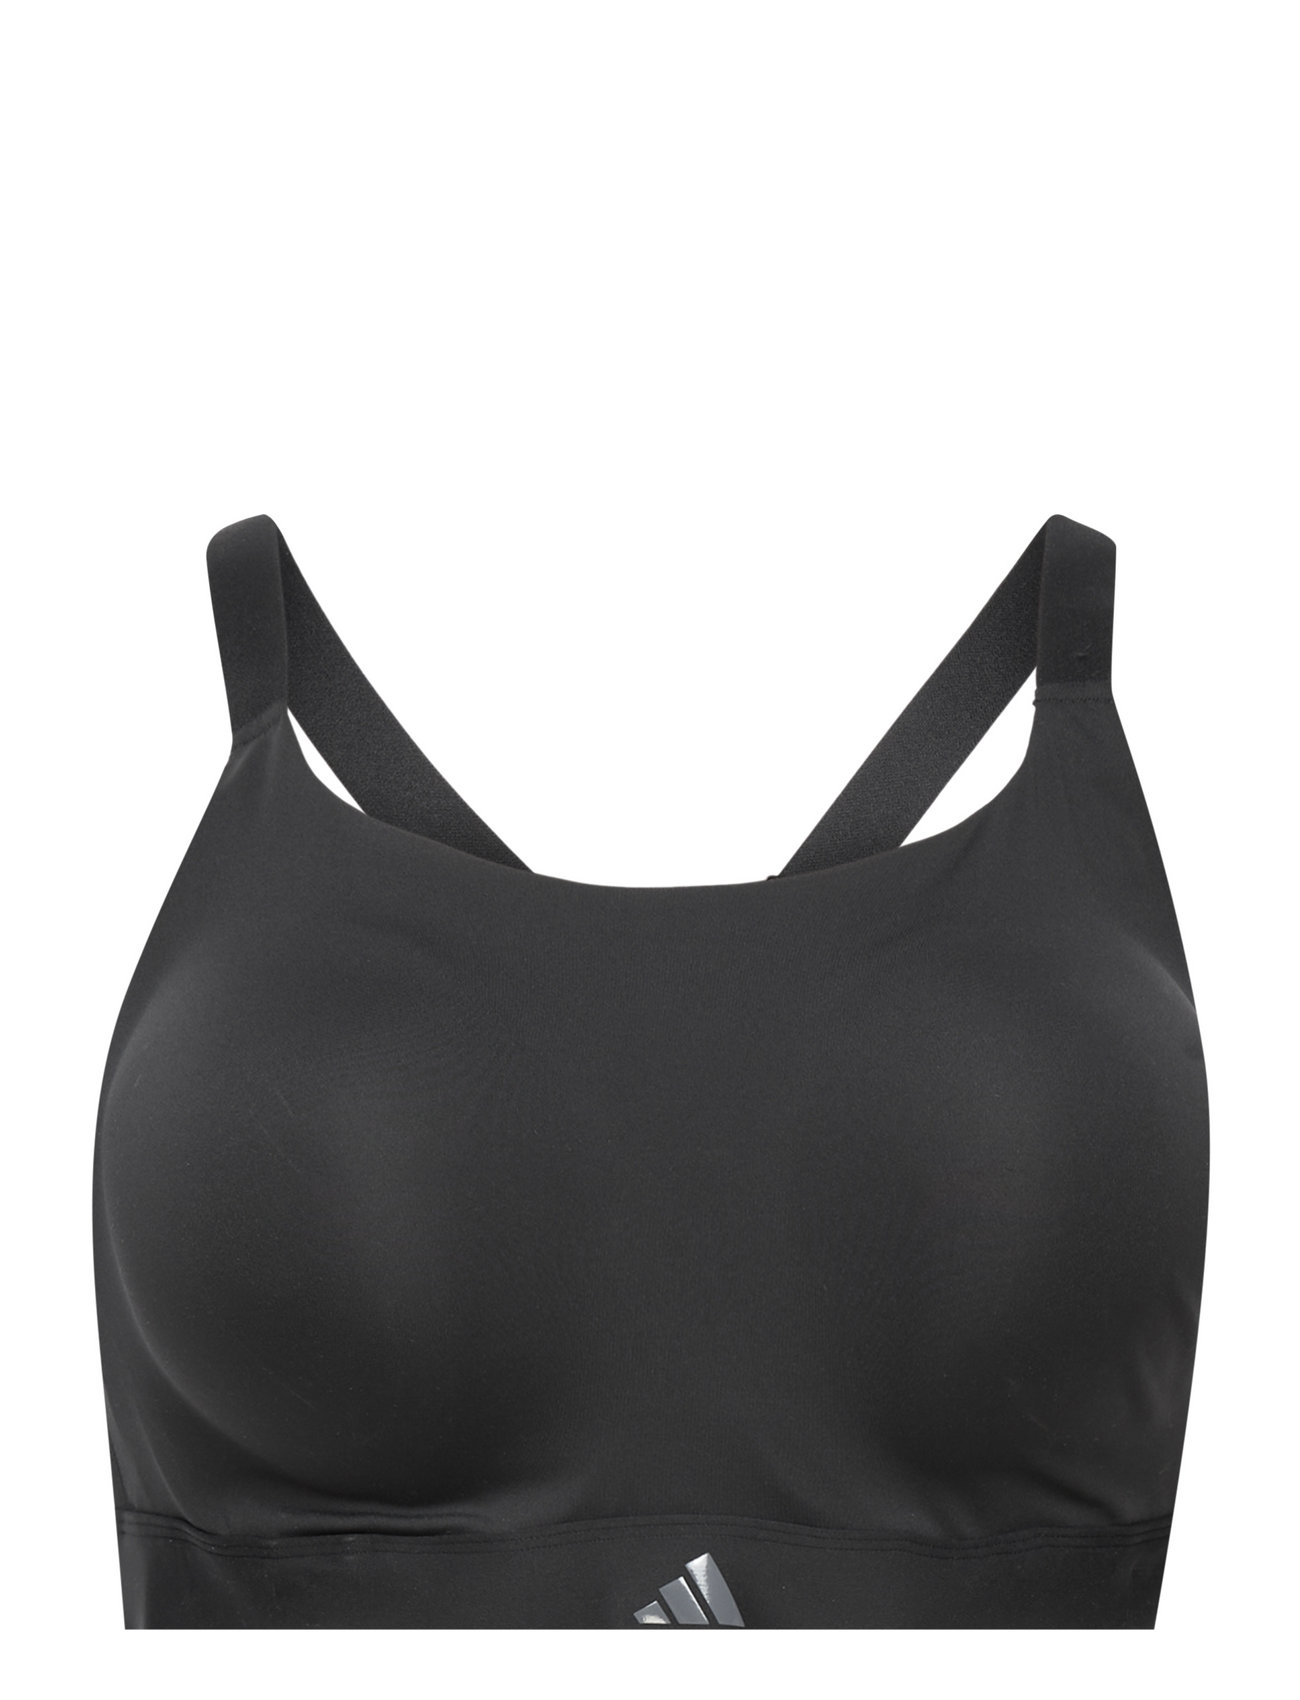 Tailored Impact Luxe Training High-Support Bra  Sport Bras & Tops Sports Bras - All Black Adidas Performance